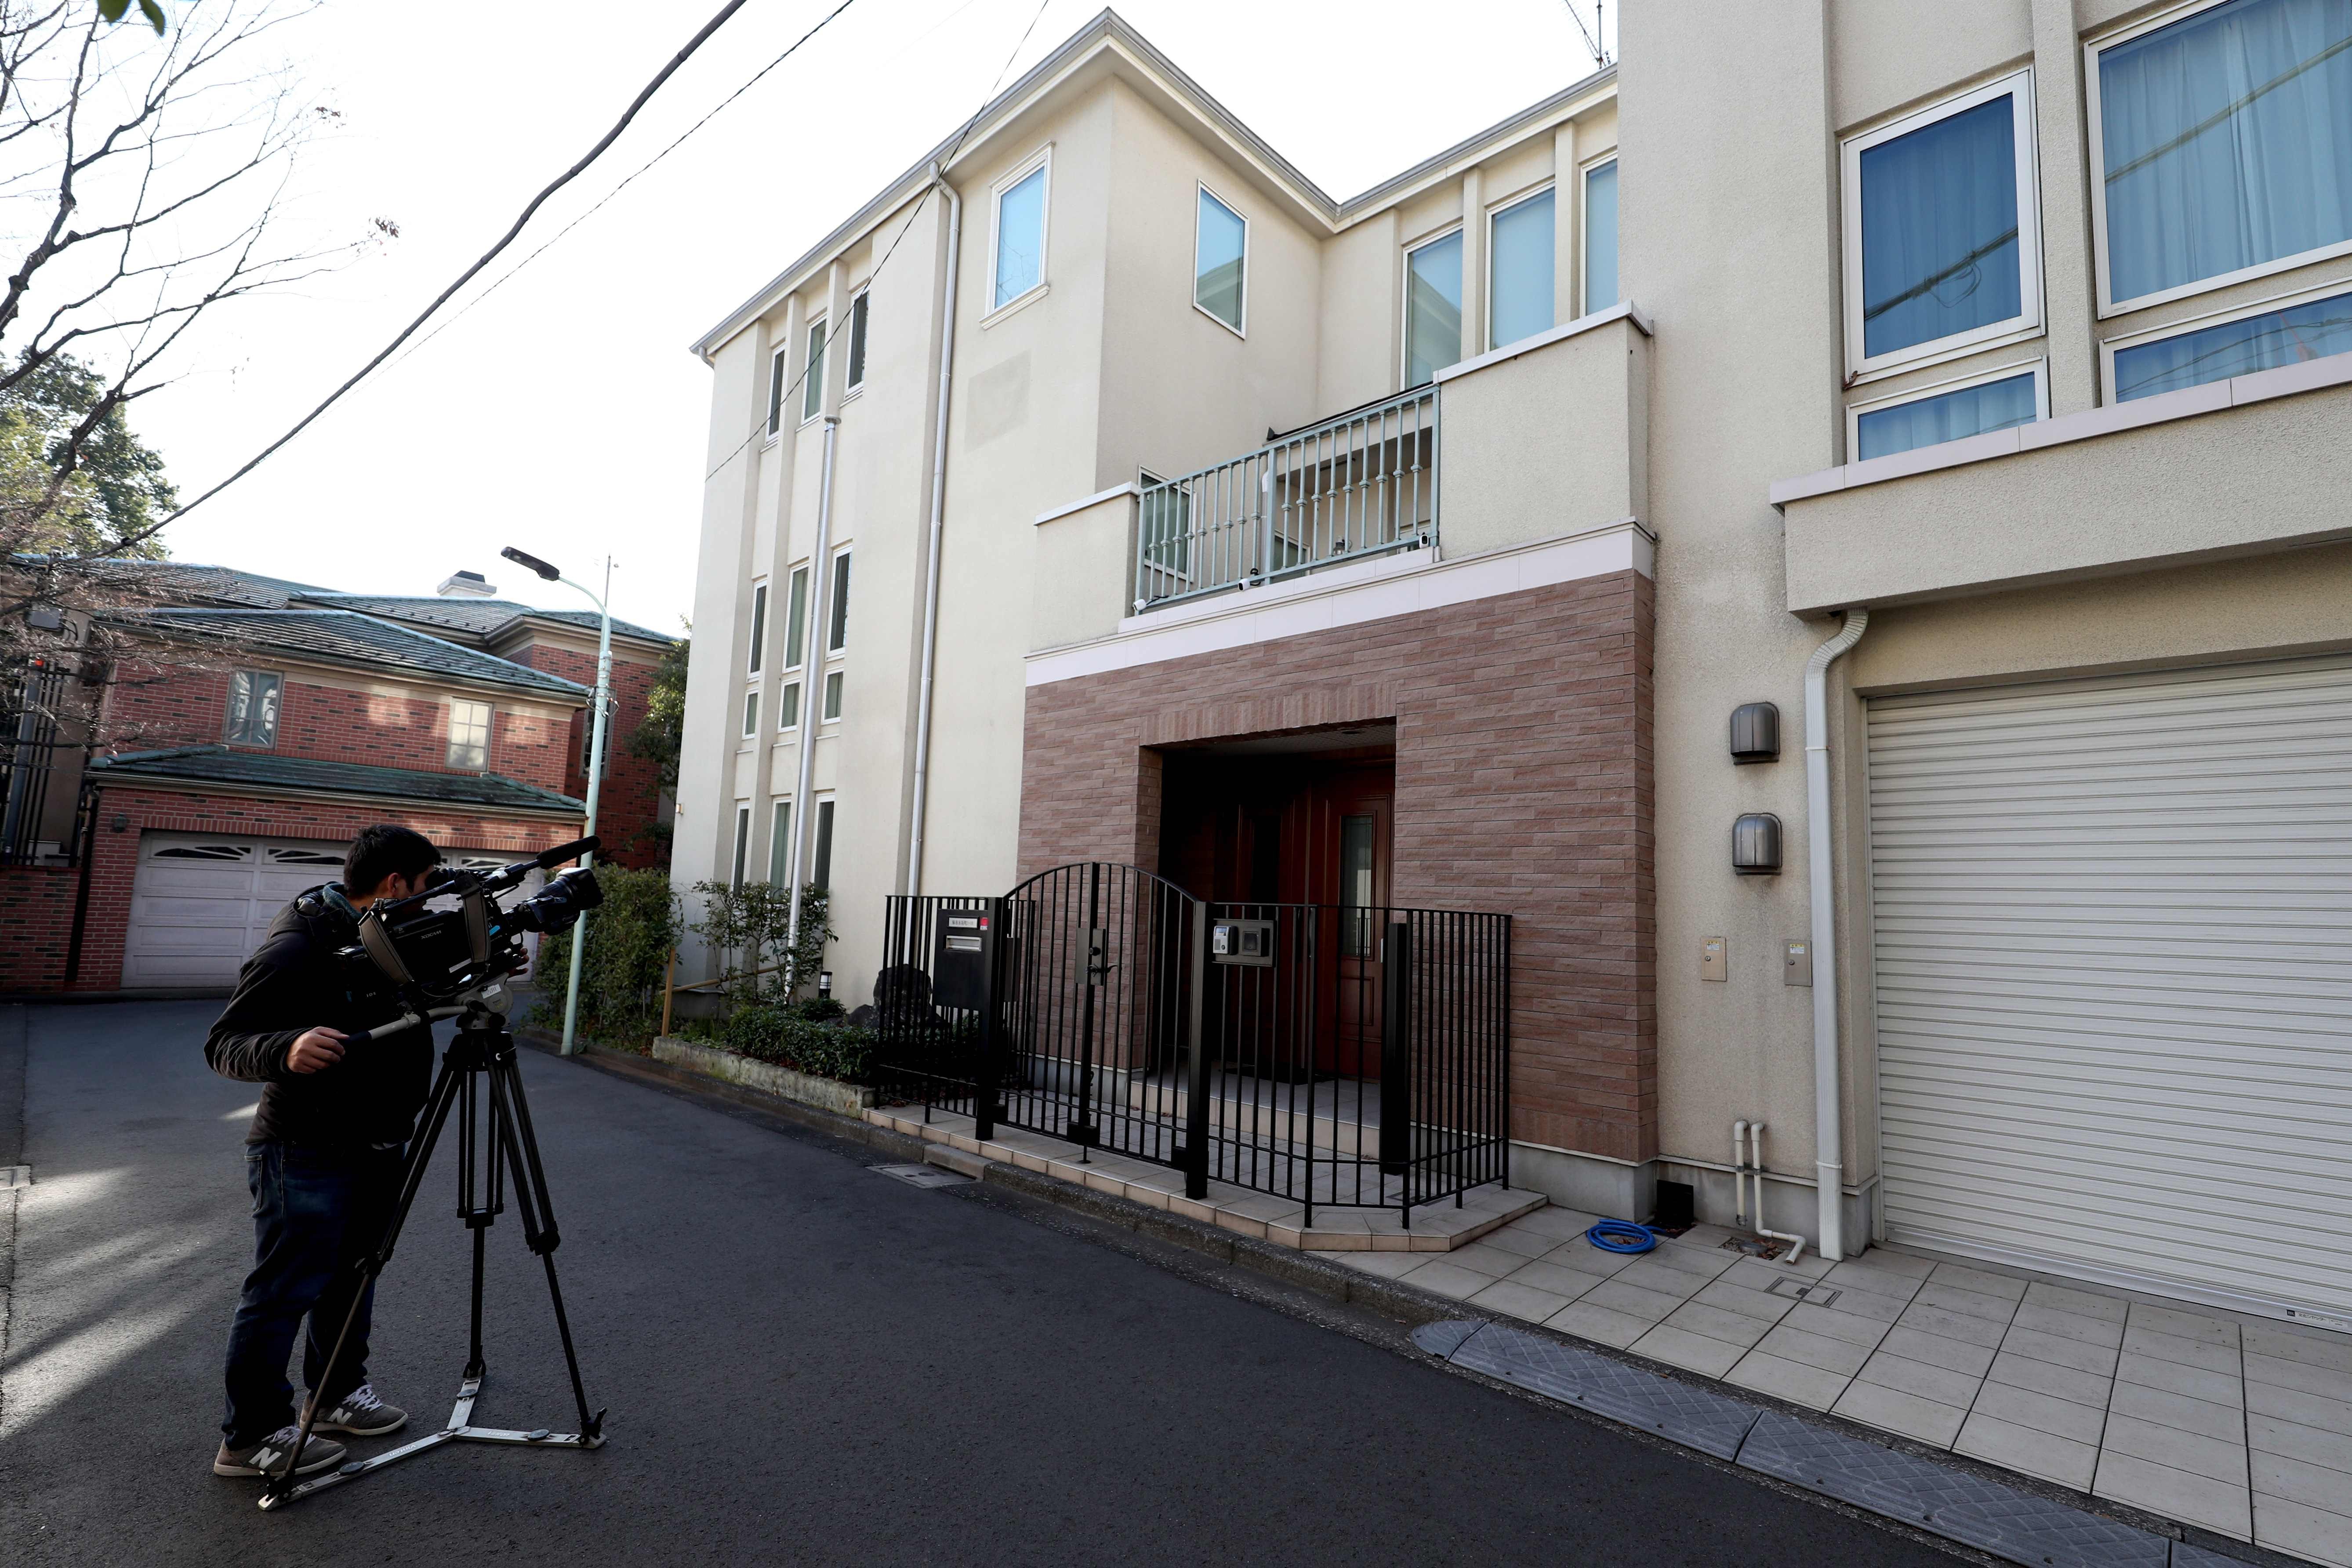 A cameraman films the residence of former Nissan chairman Carlos Ghosn in Tokyo on January 3, after Ghosn fled Japan to avoid a trial. Photo: AFP